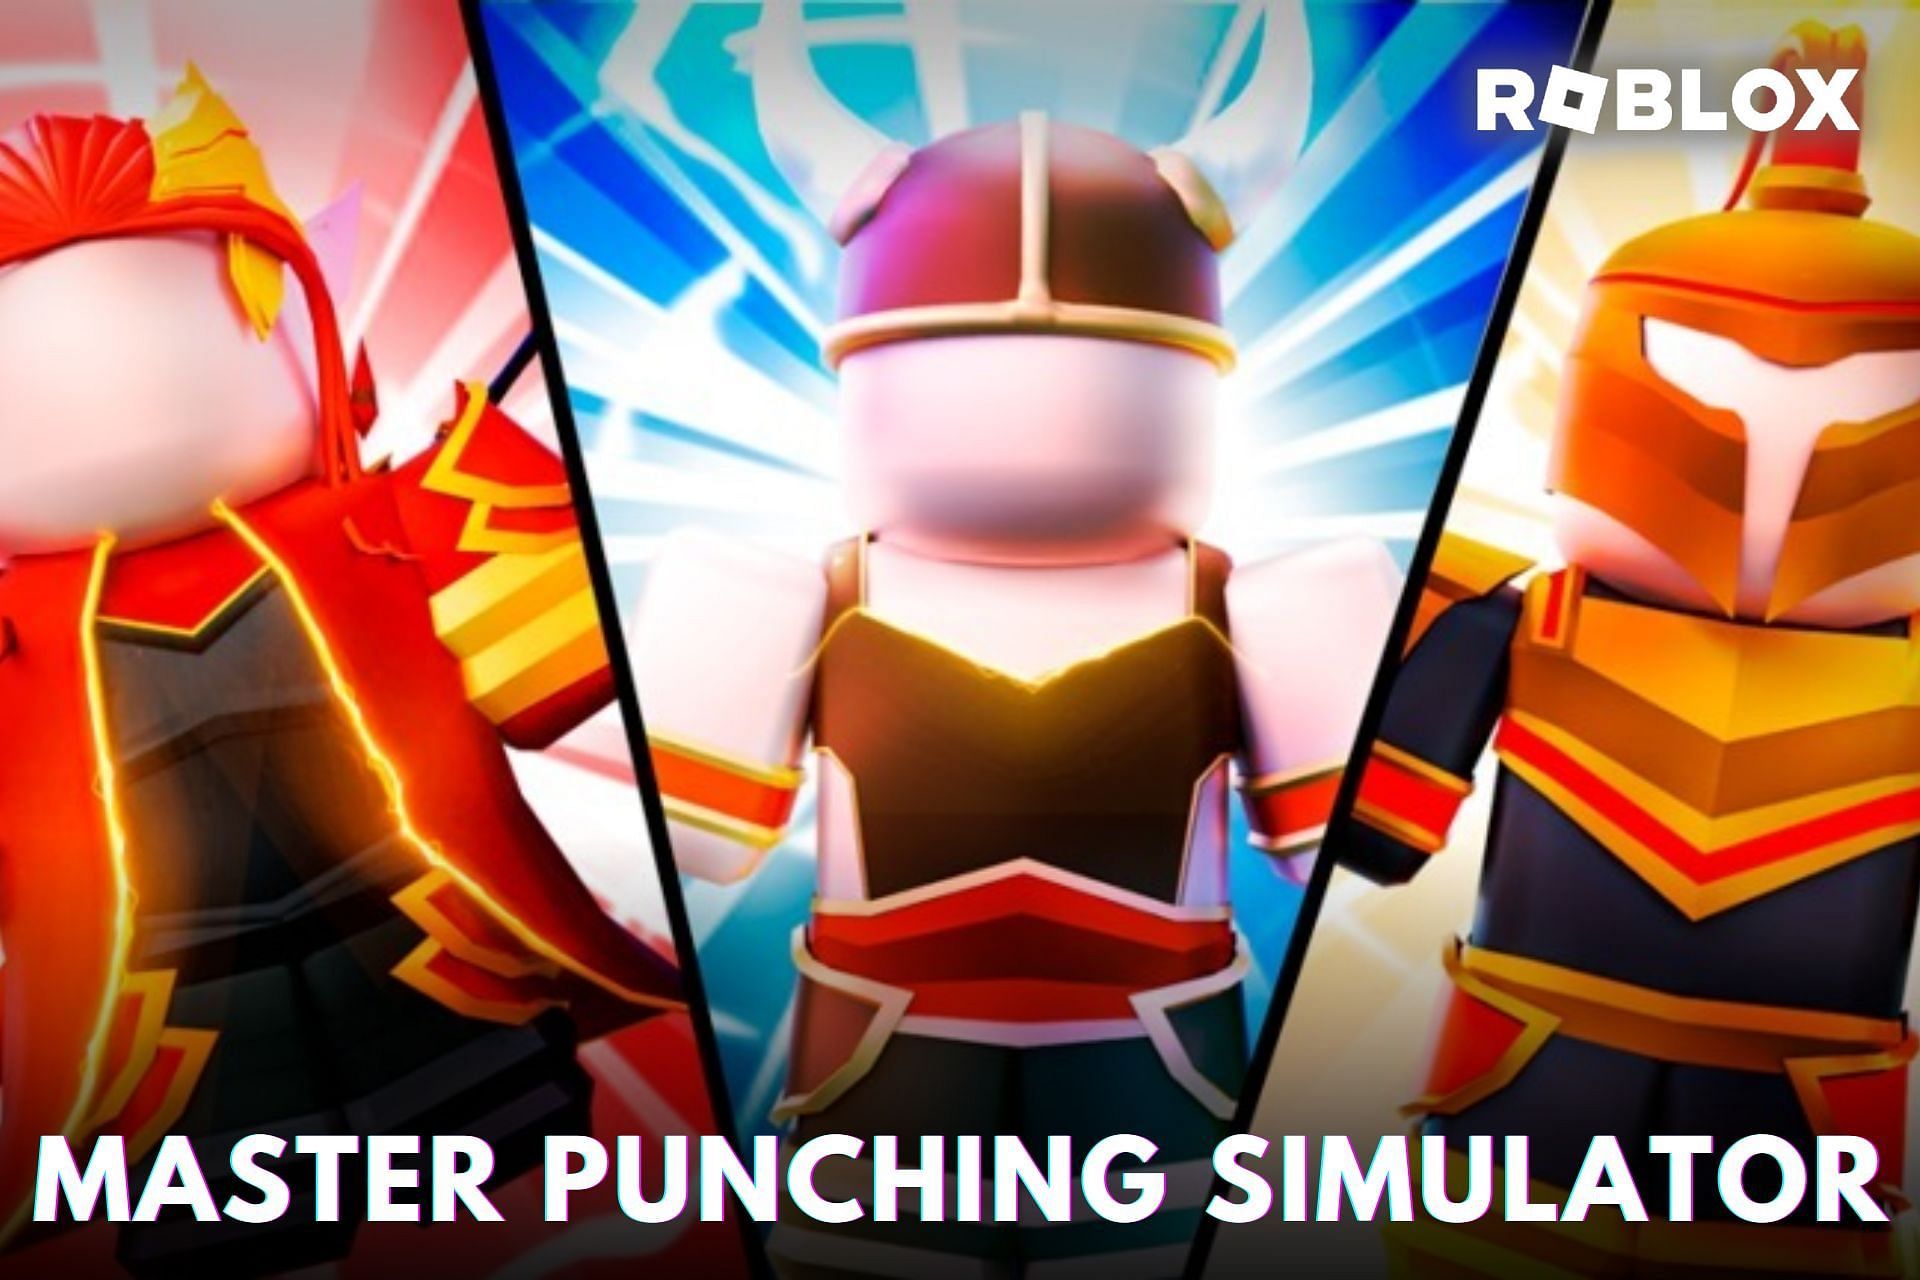 Roblox Master Punching Simulator : The Electrifying Punches. (Image via Roblox)